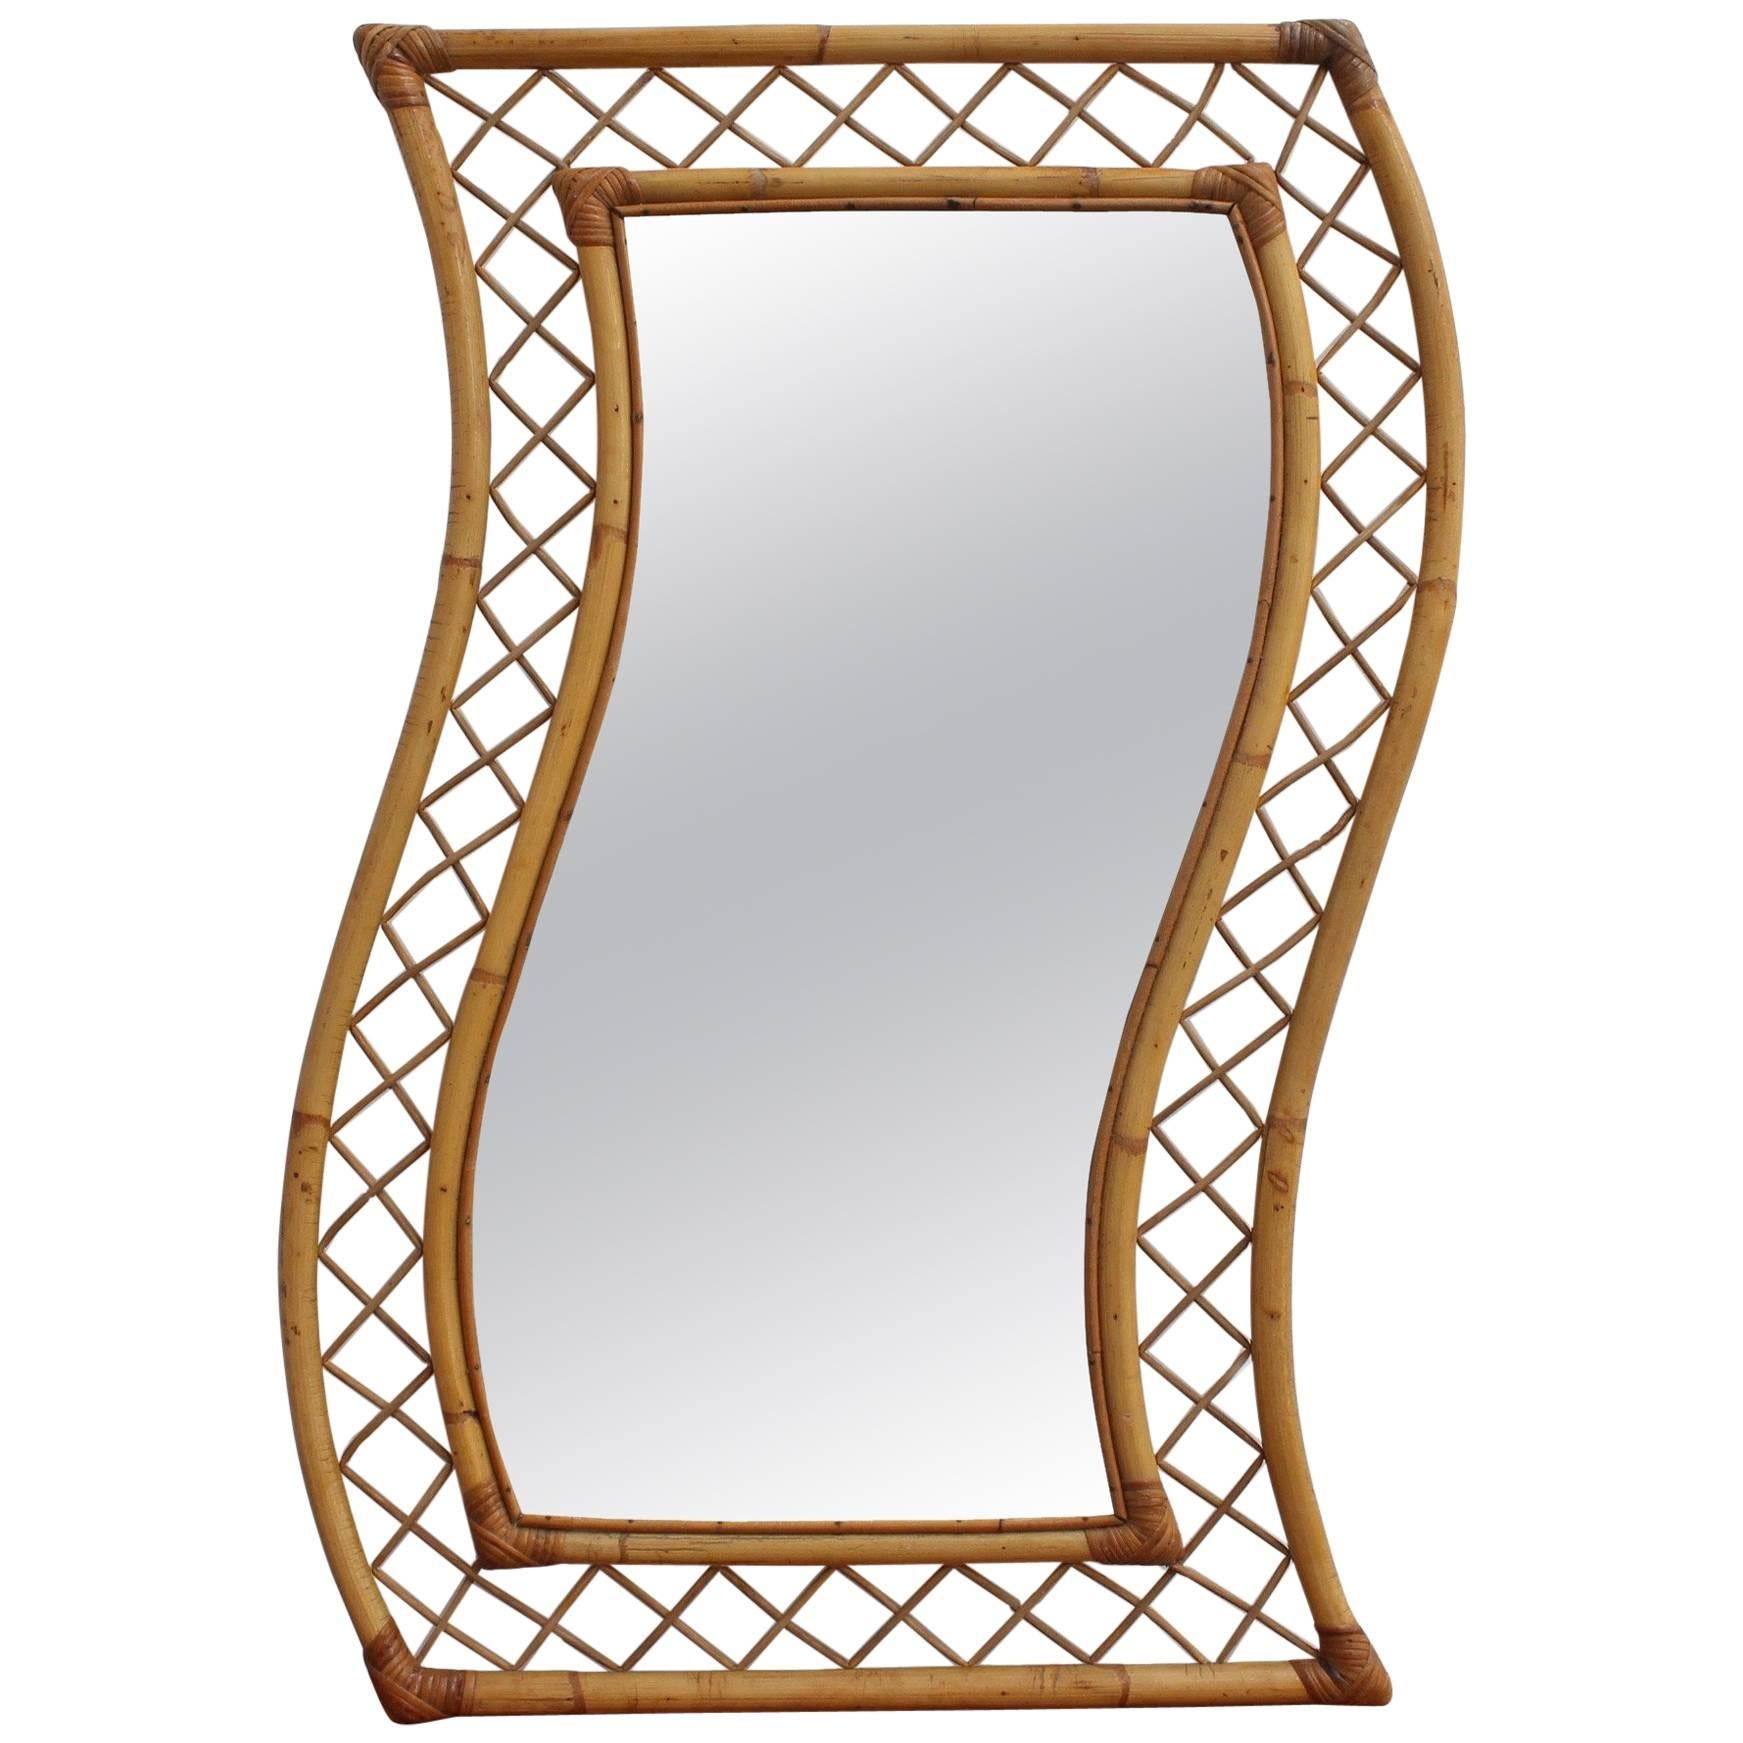 French Bamboo and Rattan Mirror, circa 1950s For Sale